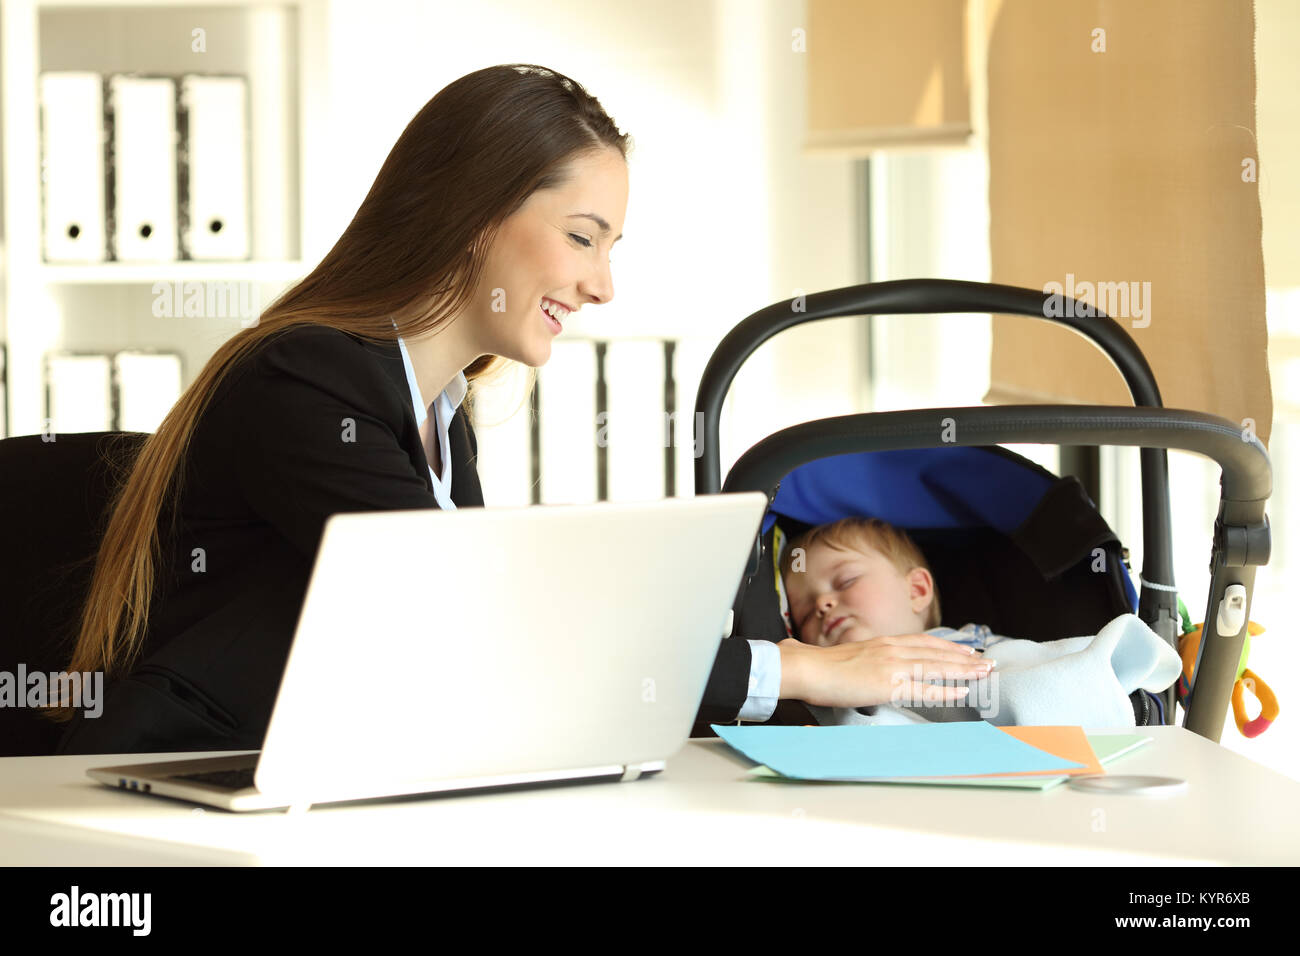 Happy mother working and taking care of her baby son at office Stock Photo